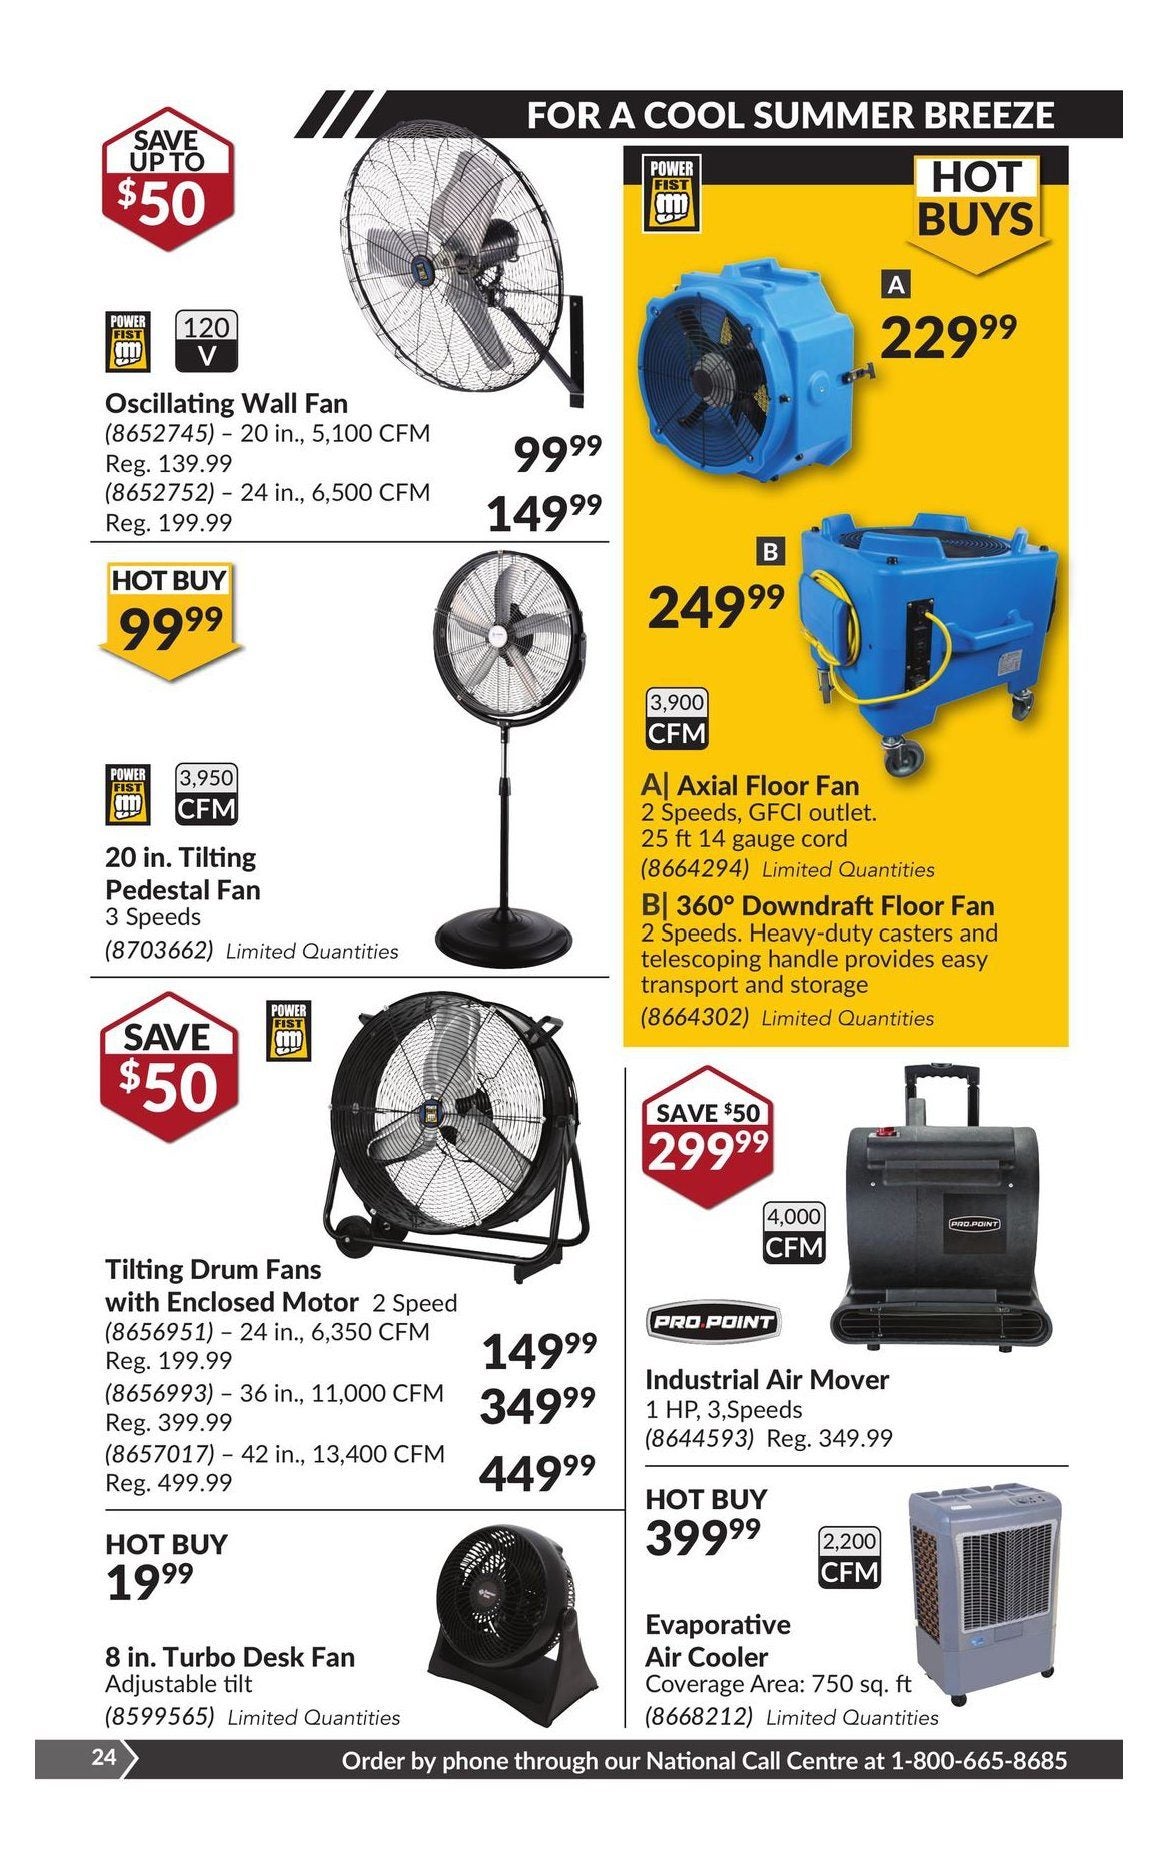 Princess Auto Weekly Flyer Equipped For Anything Jul 11 – 23